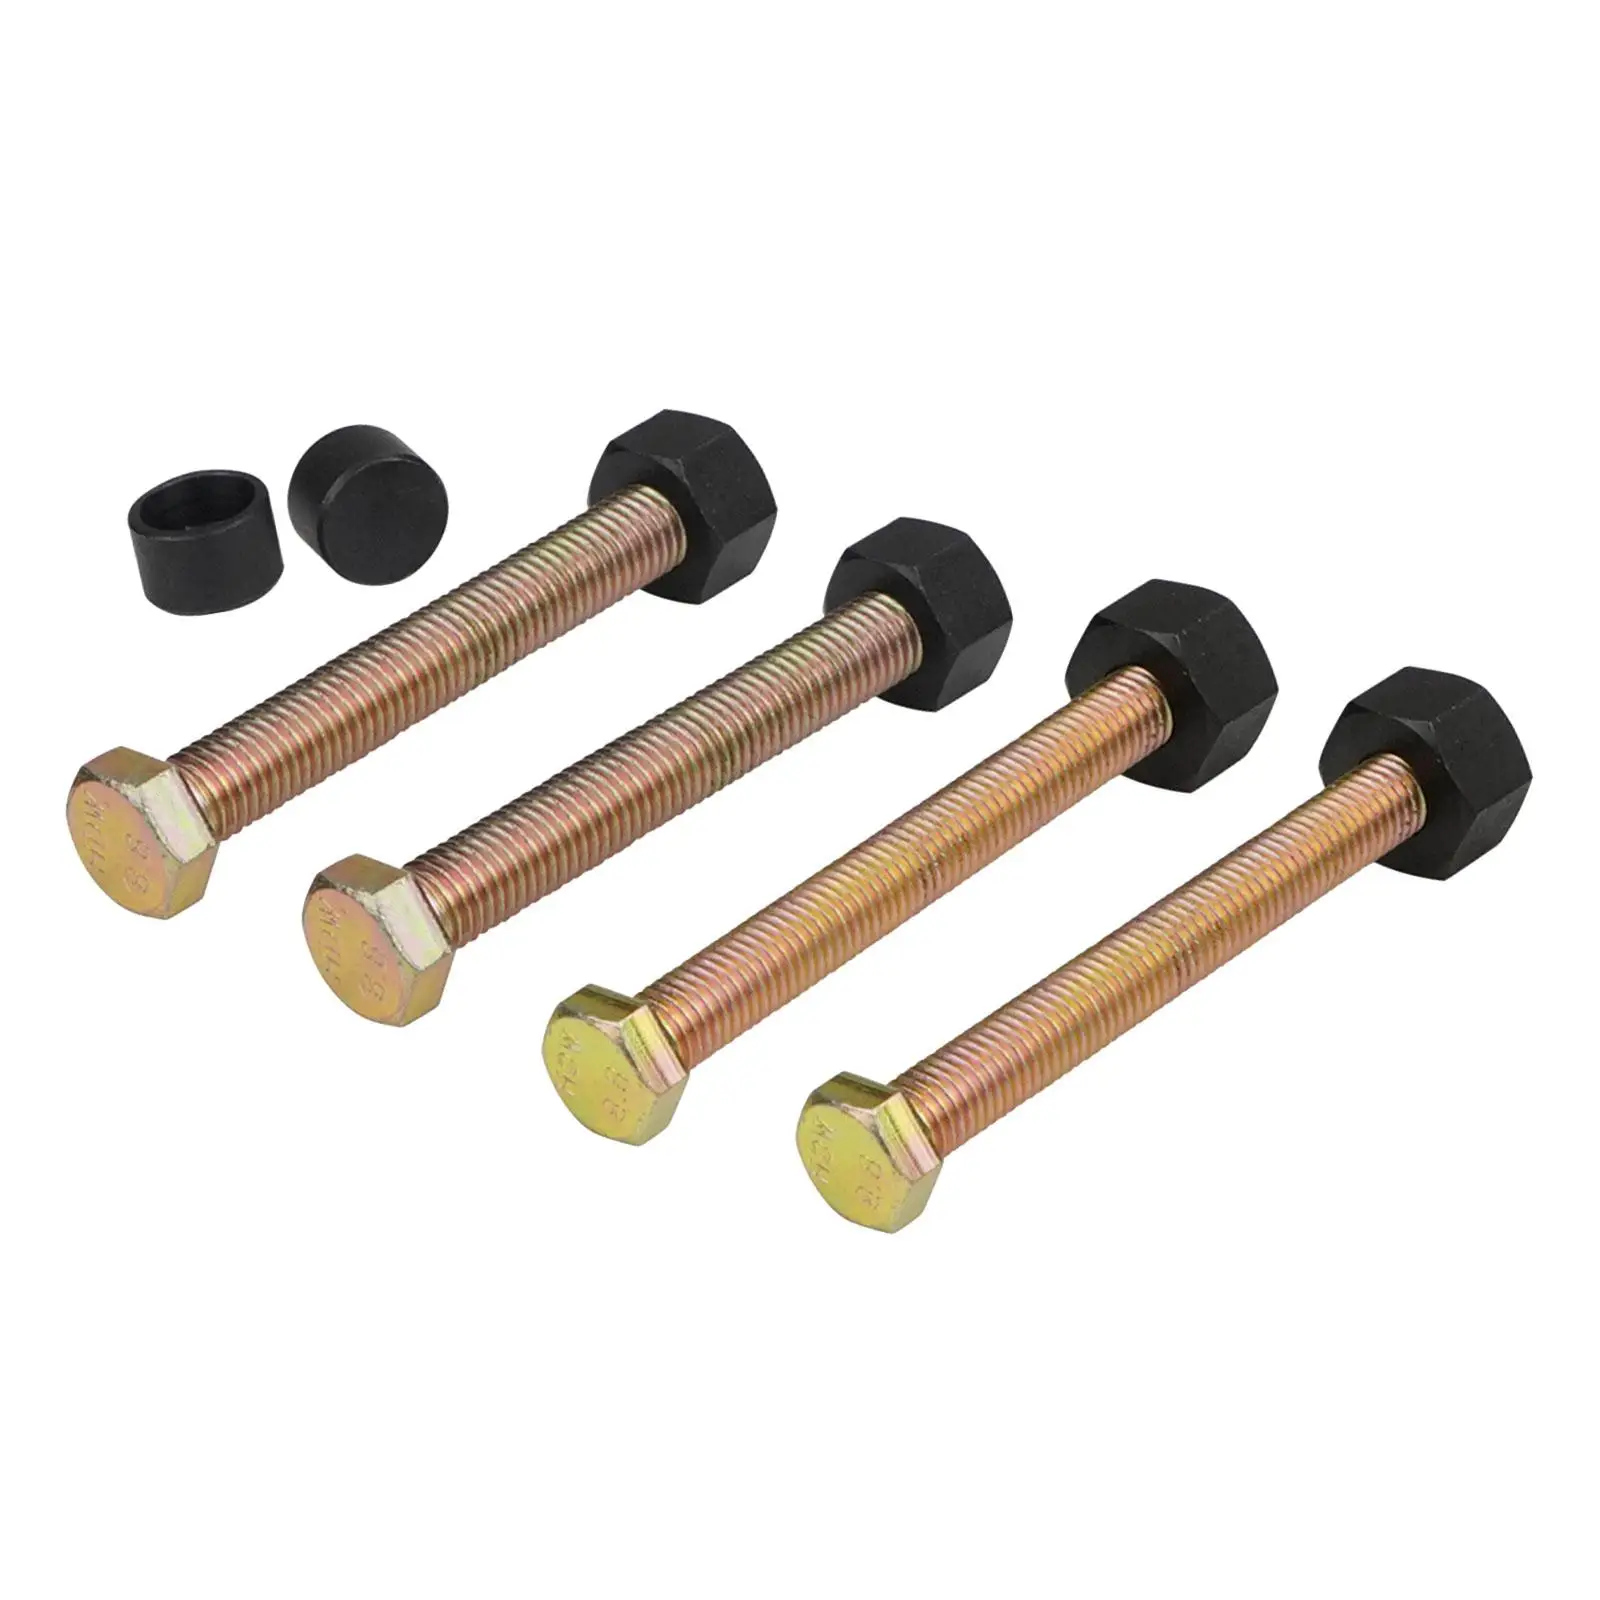 78834 Accessory Replaces Easy to Install Impact Rated Hub Removal Bolt Set